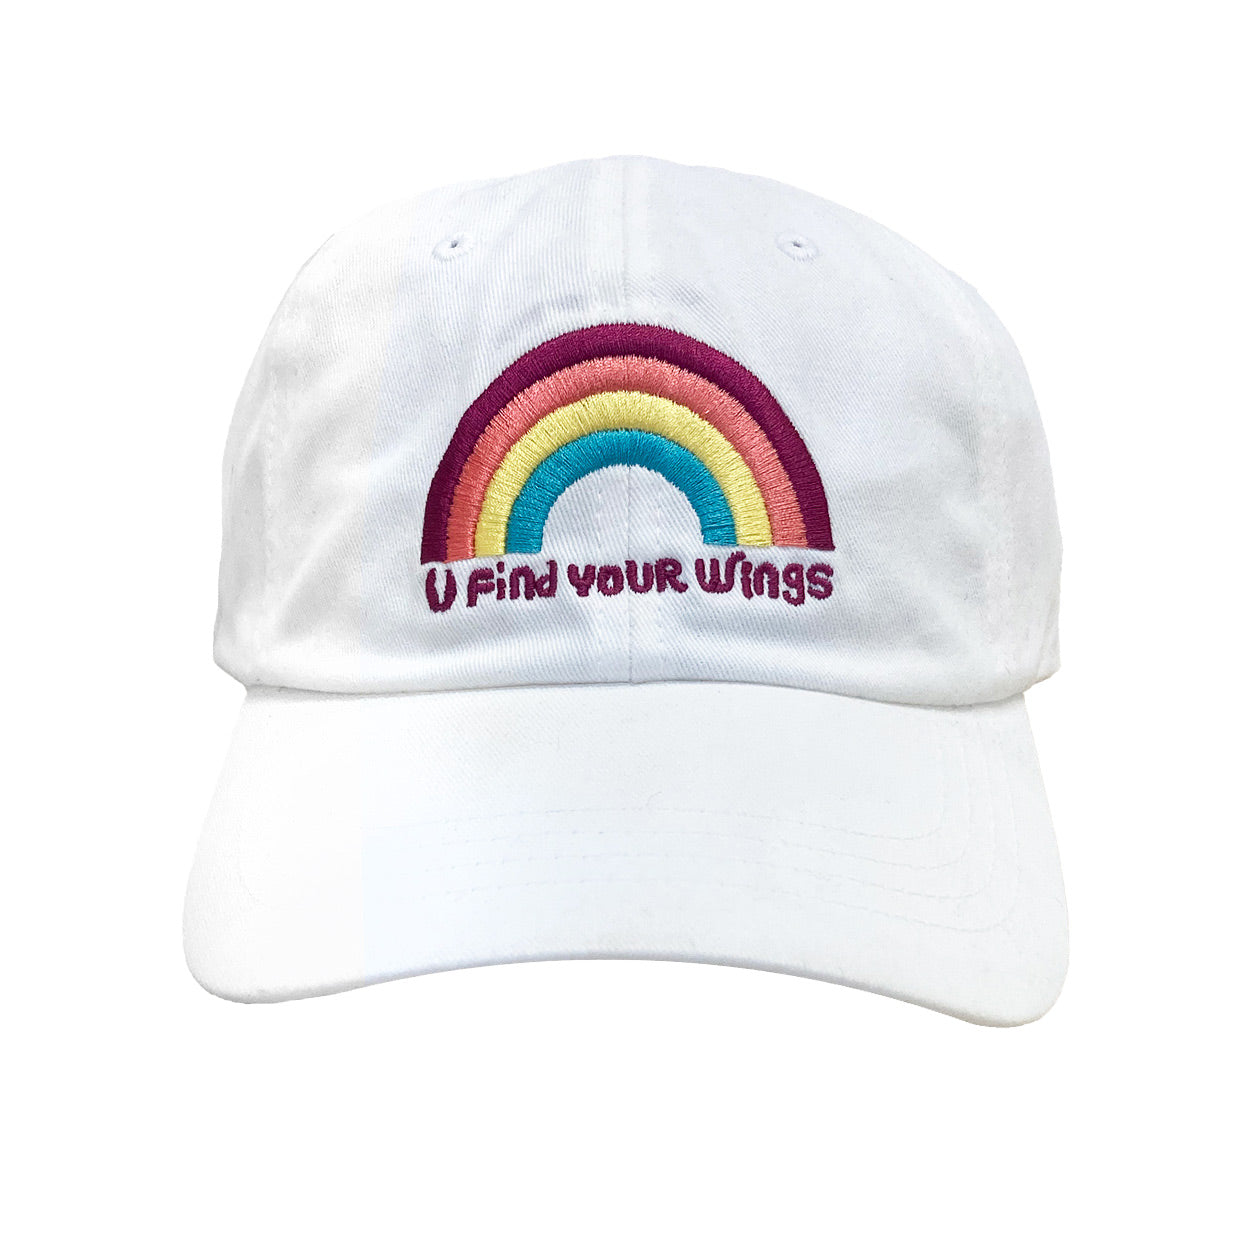 Find-your-wings-rainbow-hat-white.jpg